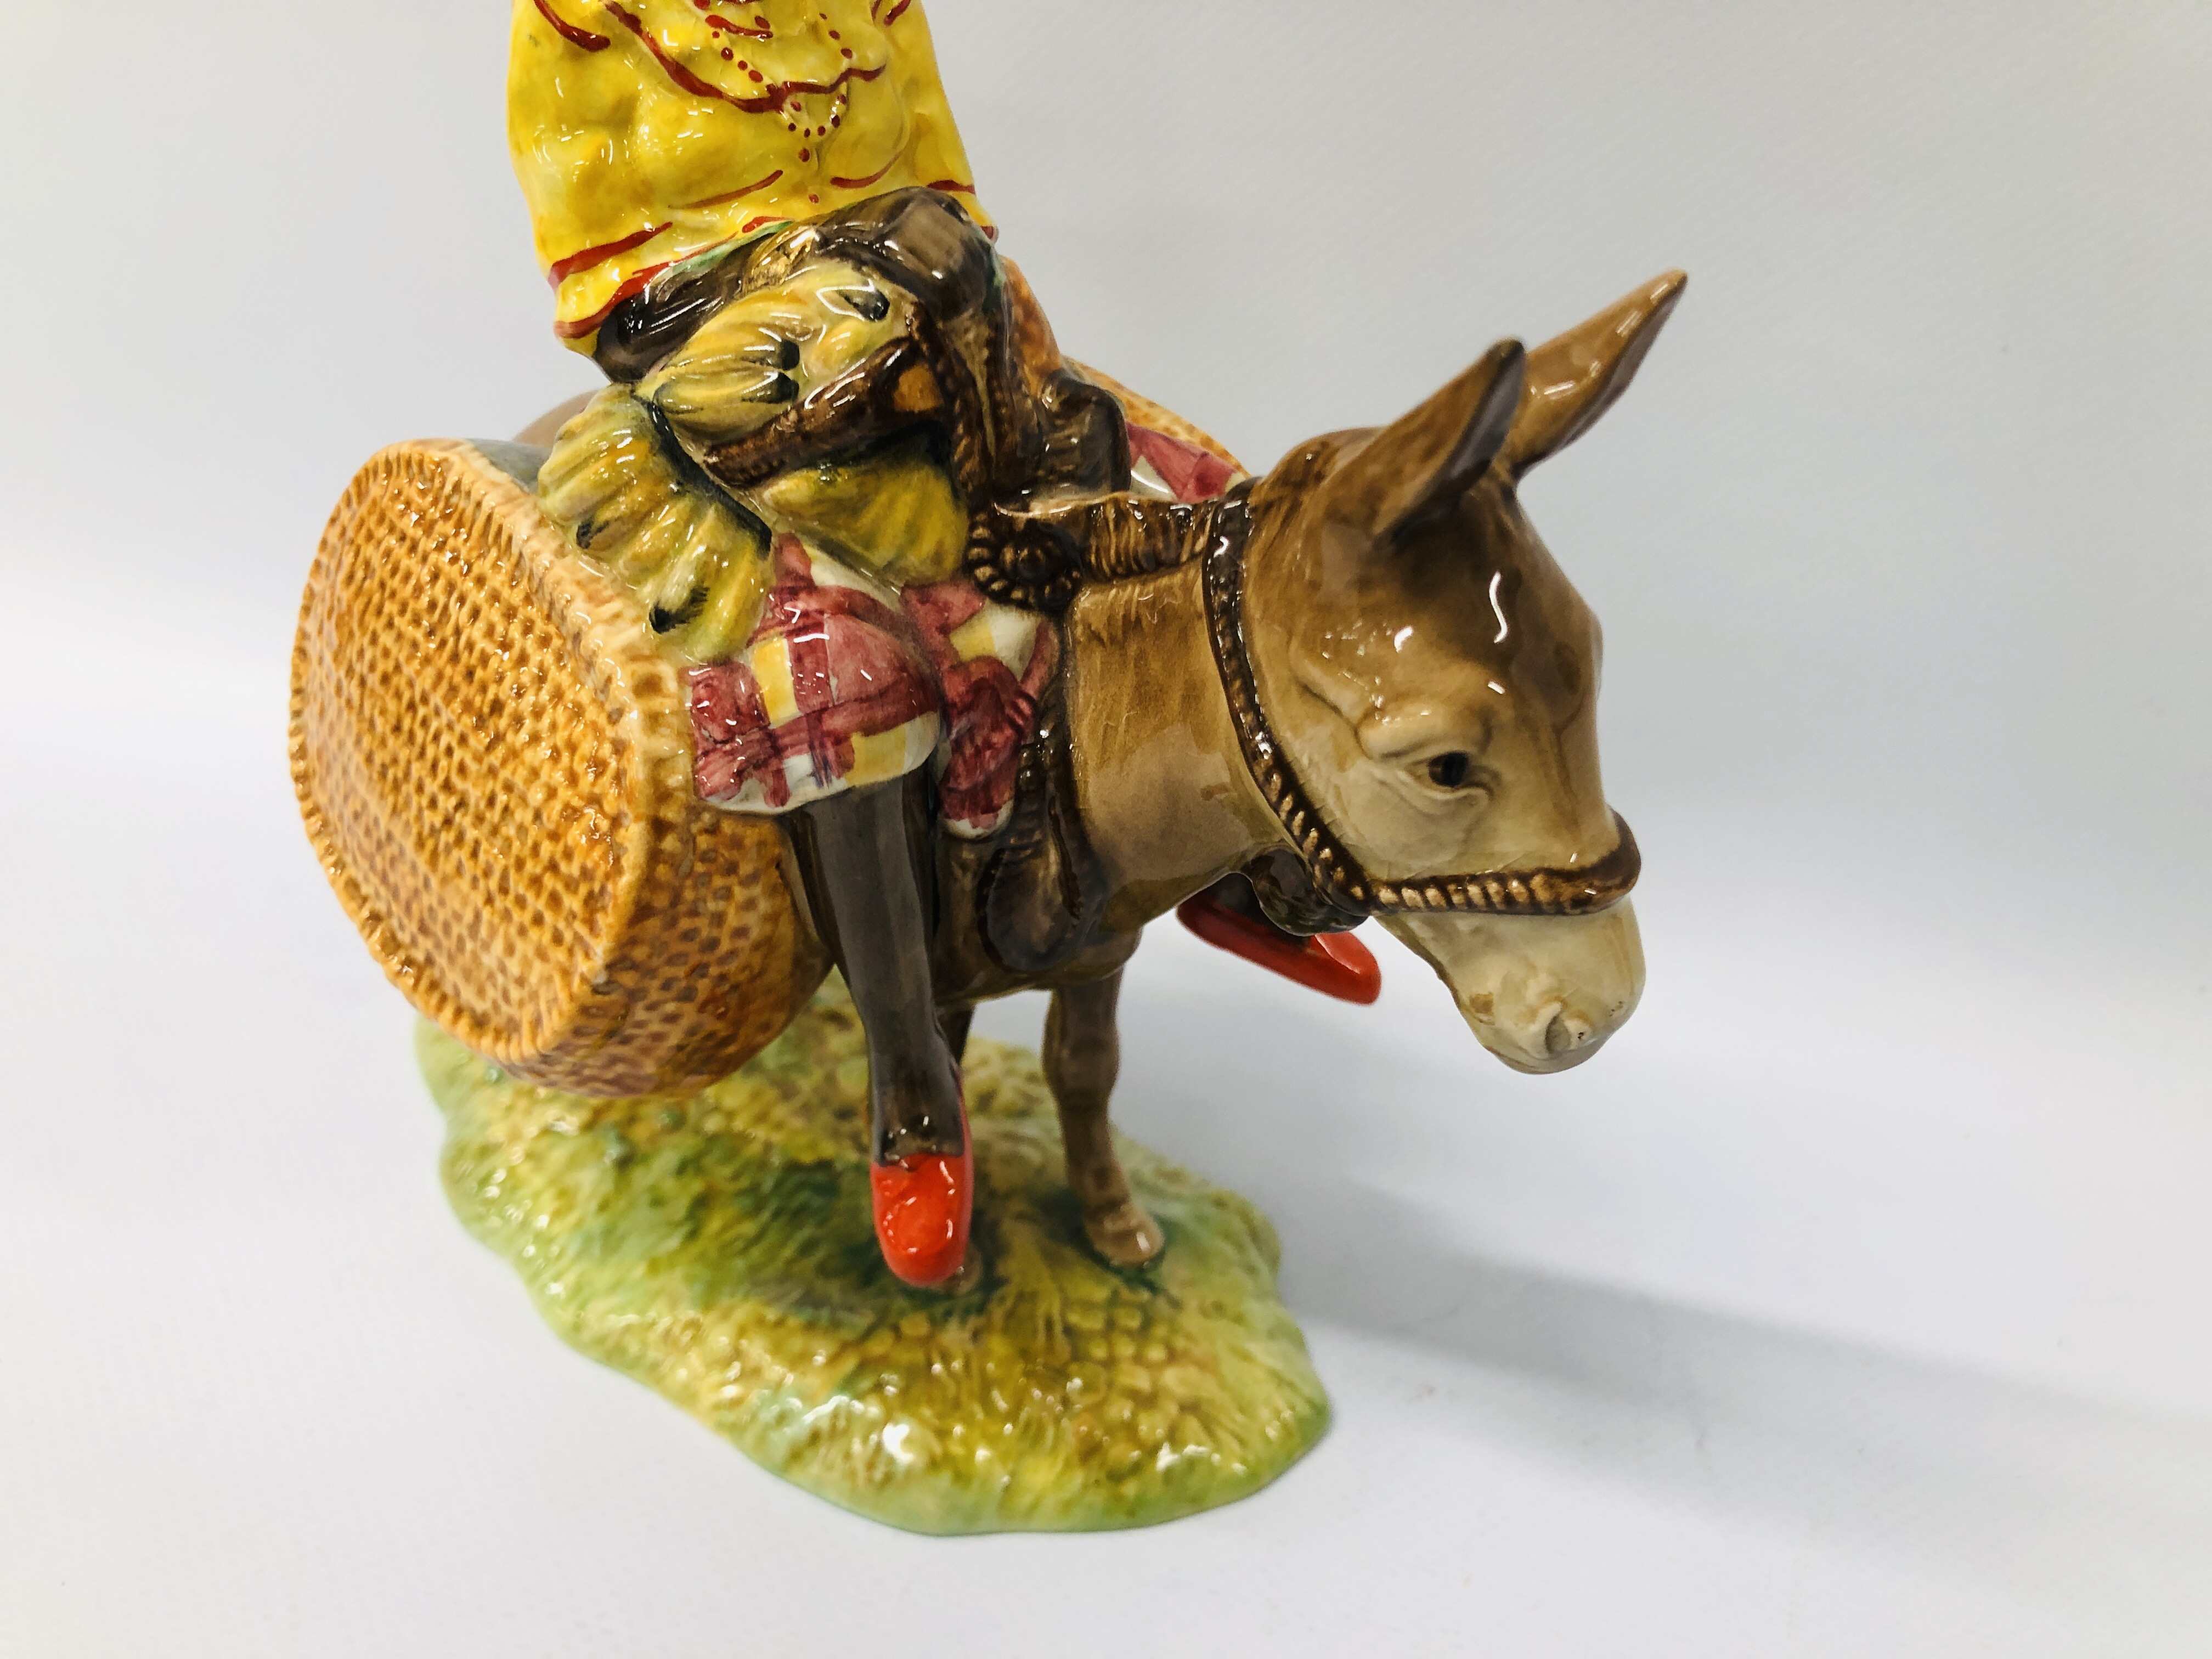 BESWICK "SUSIE JAMAICA" FIGURE ALONG WITH A MINIATURE BESWICK BENEAGLES WHISKY DECANTER (EMPTY) - Image 9 of 13